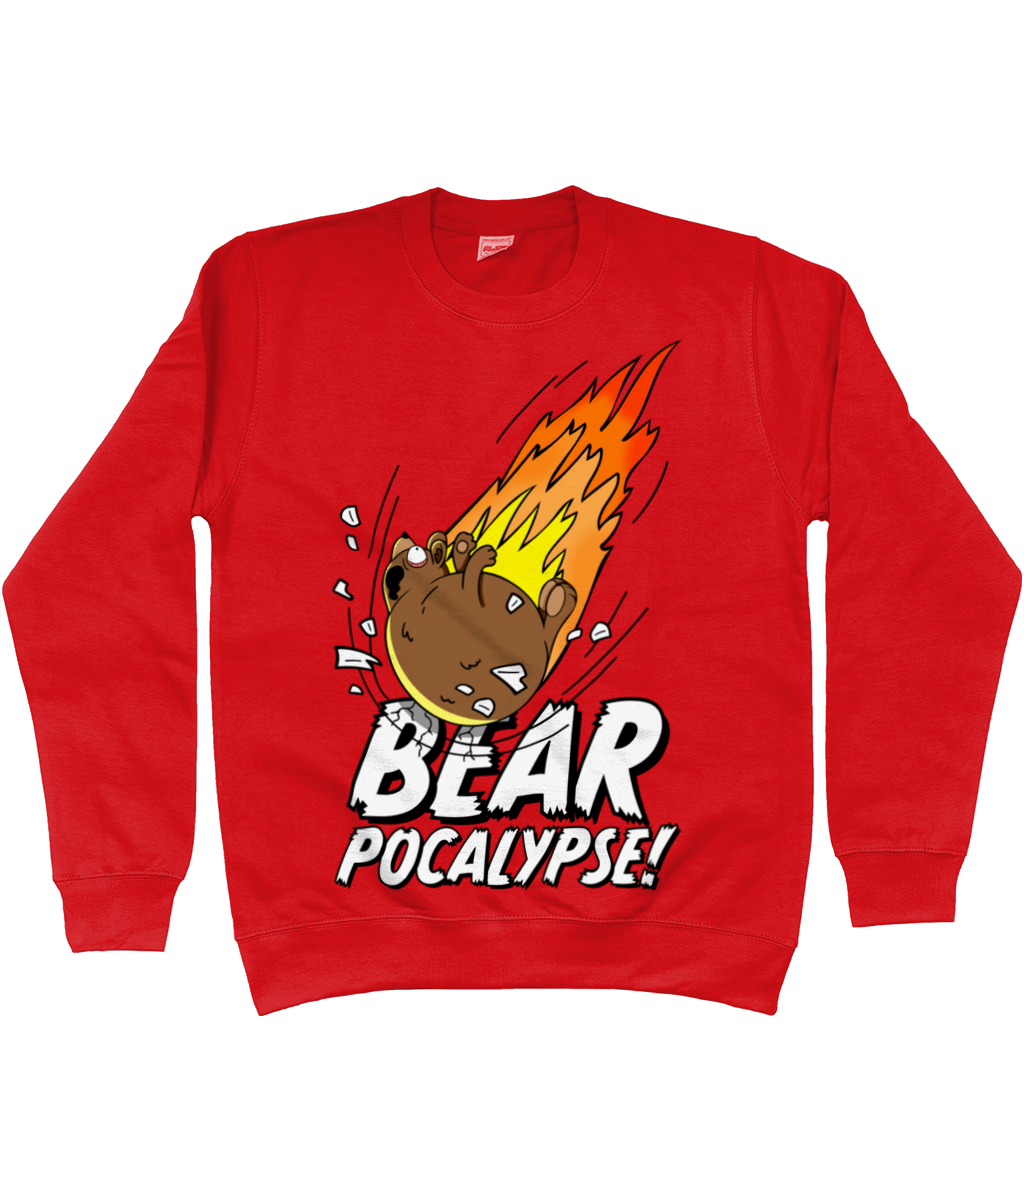 Red sweatshirt with white bold text reading Bearpocalypse! with a large bear crashing into it like a meteorite with flames shooting out behind